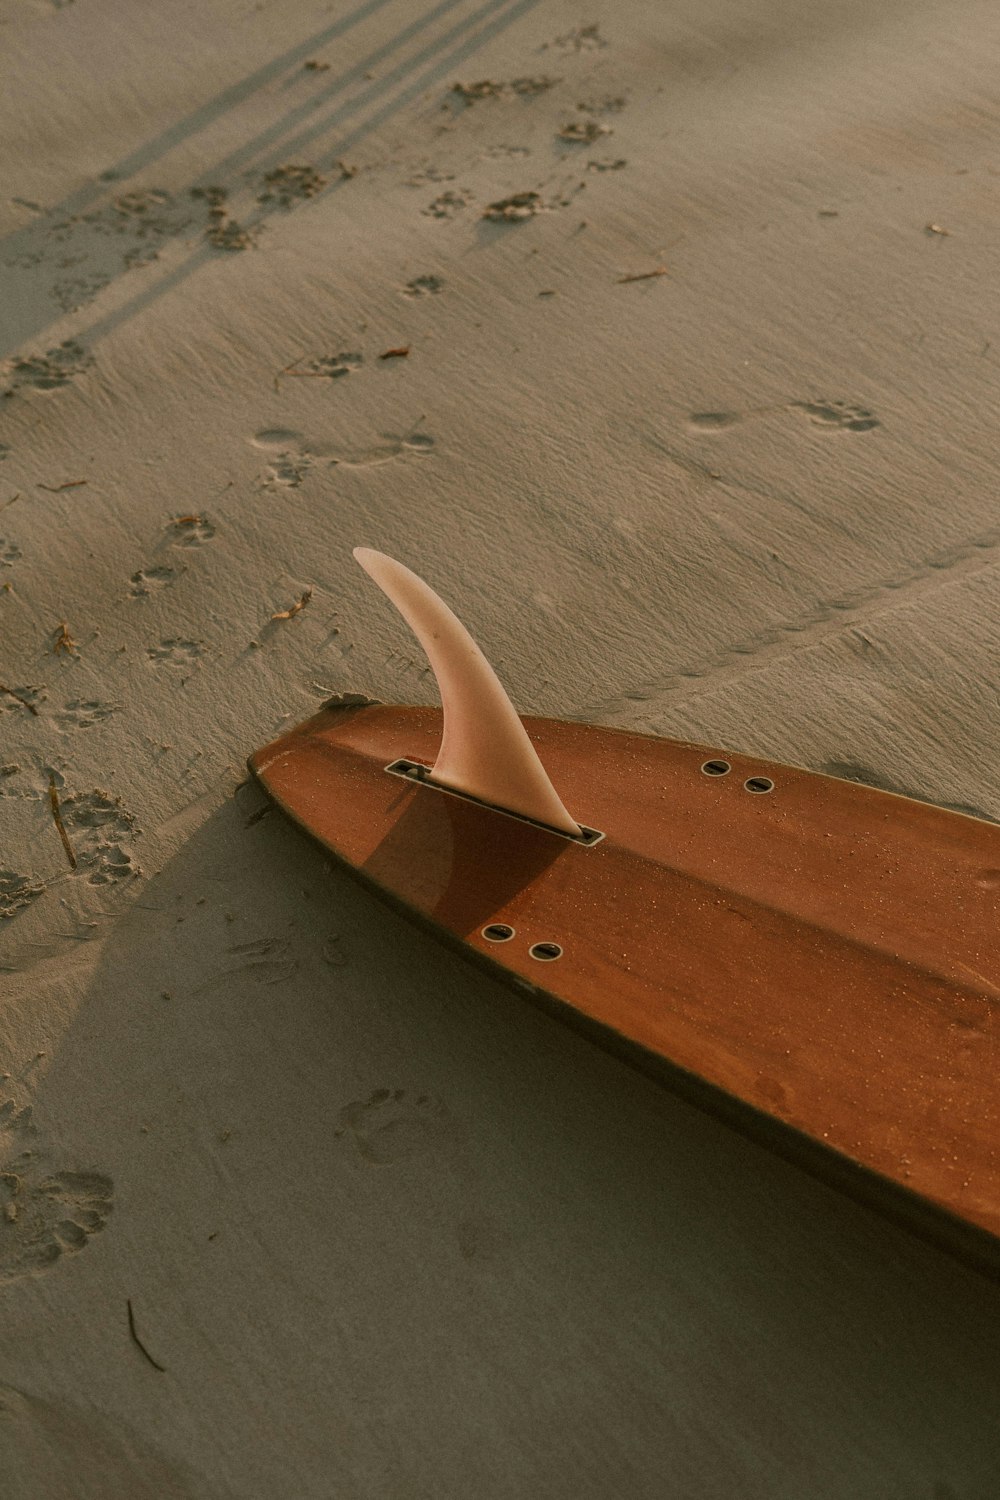 a wooden surfboard laying on the sand at the beach